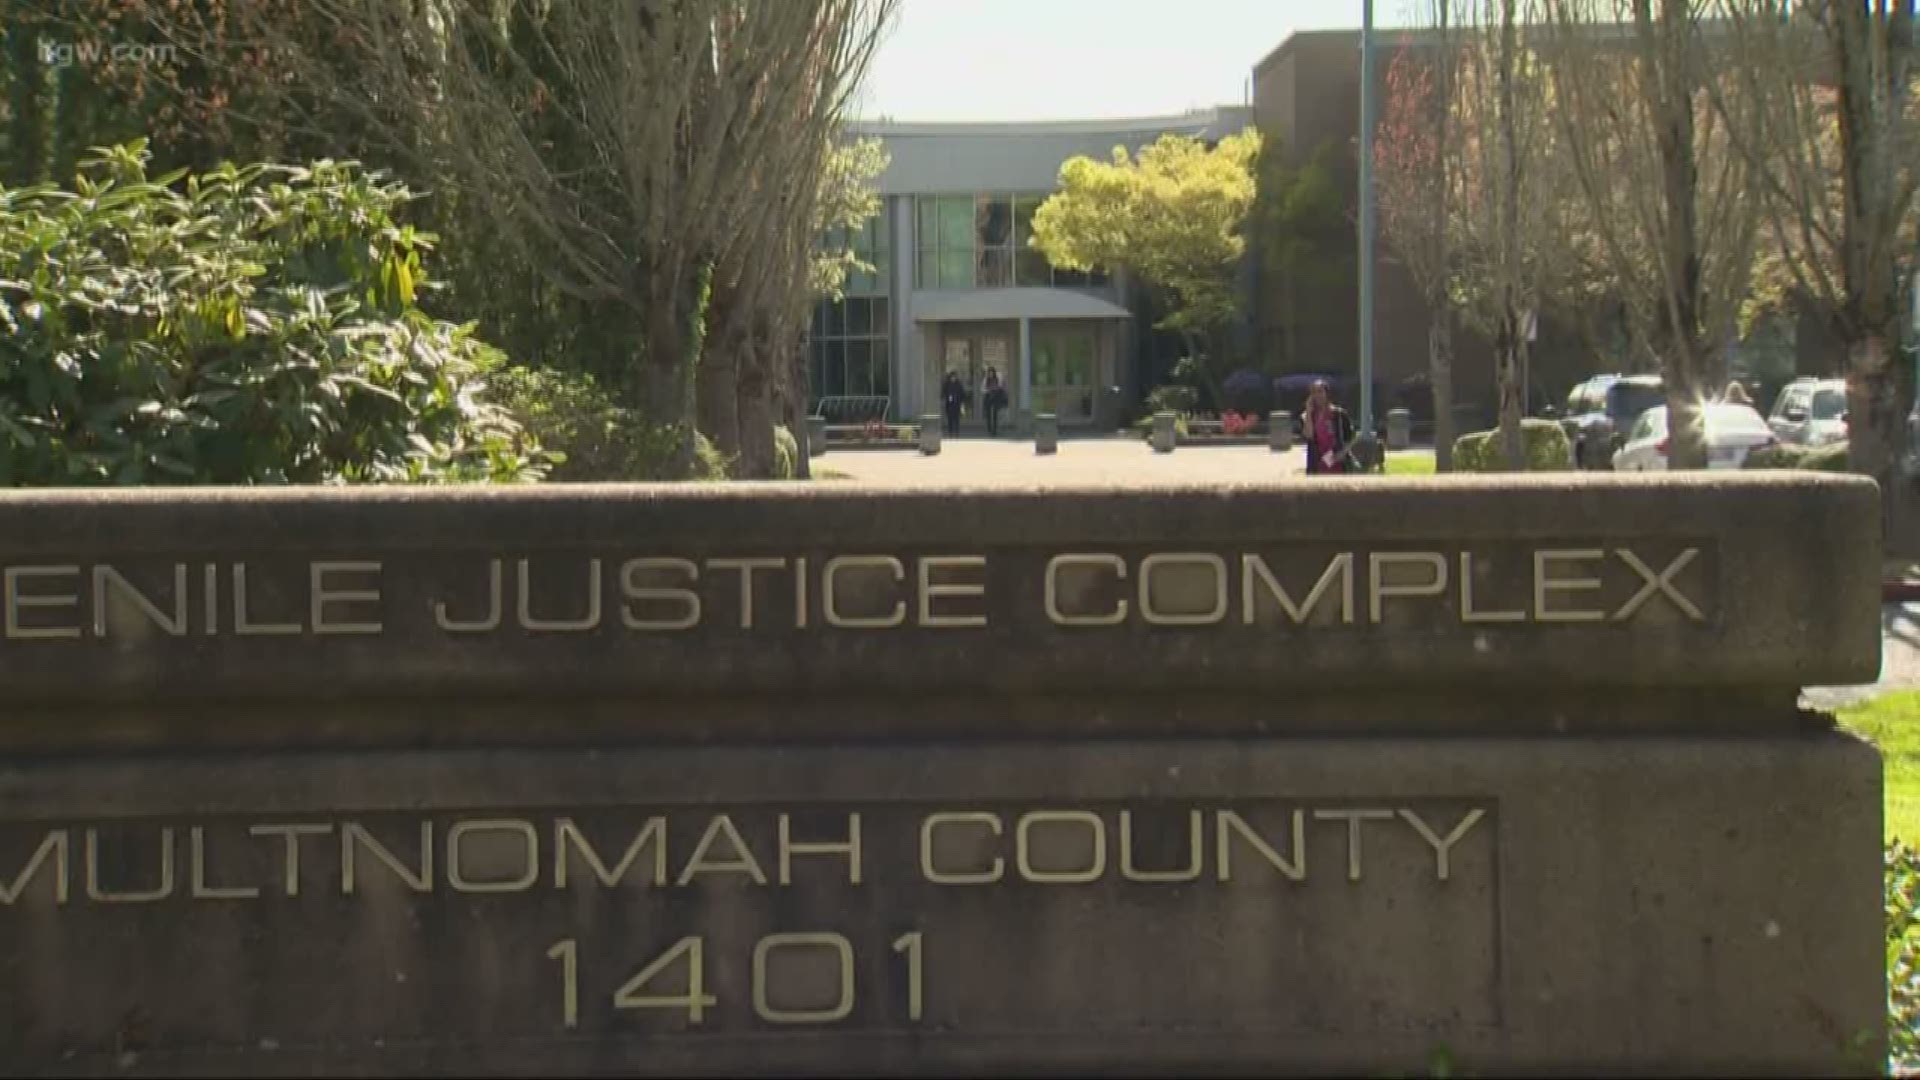 Oregon lawmakers are considering changes to Measure 11 when it comes to juvenile offenders. Senate Bill 1008 would give more leniency to juvenile offenders who commit Measure 11 crimes.